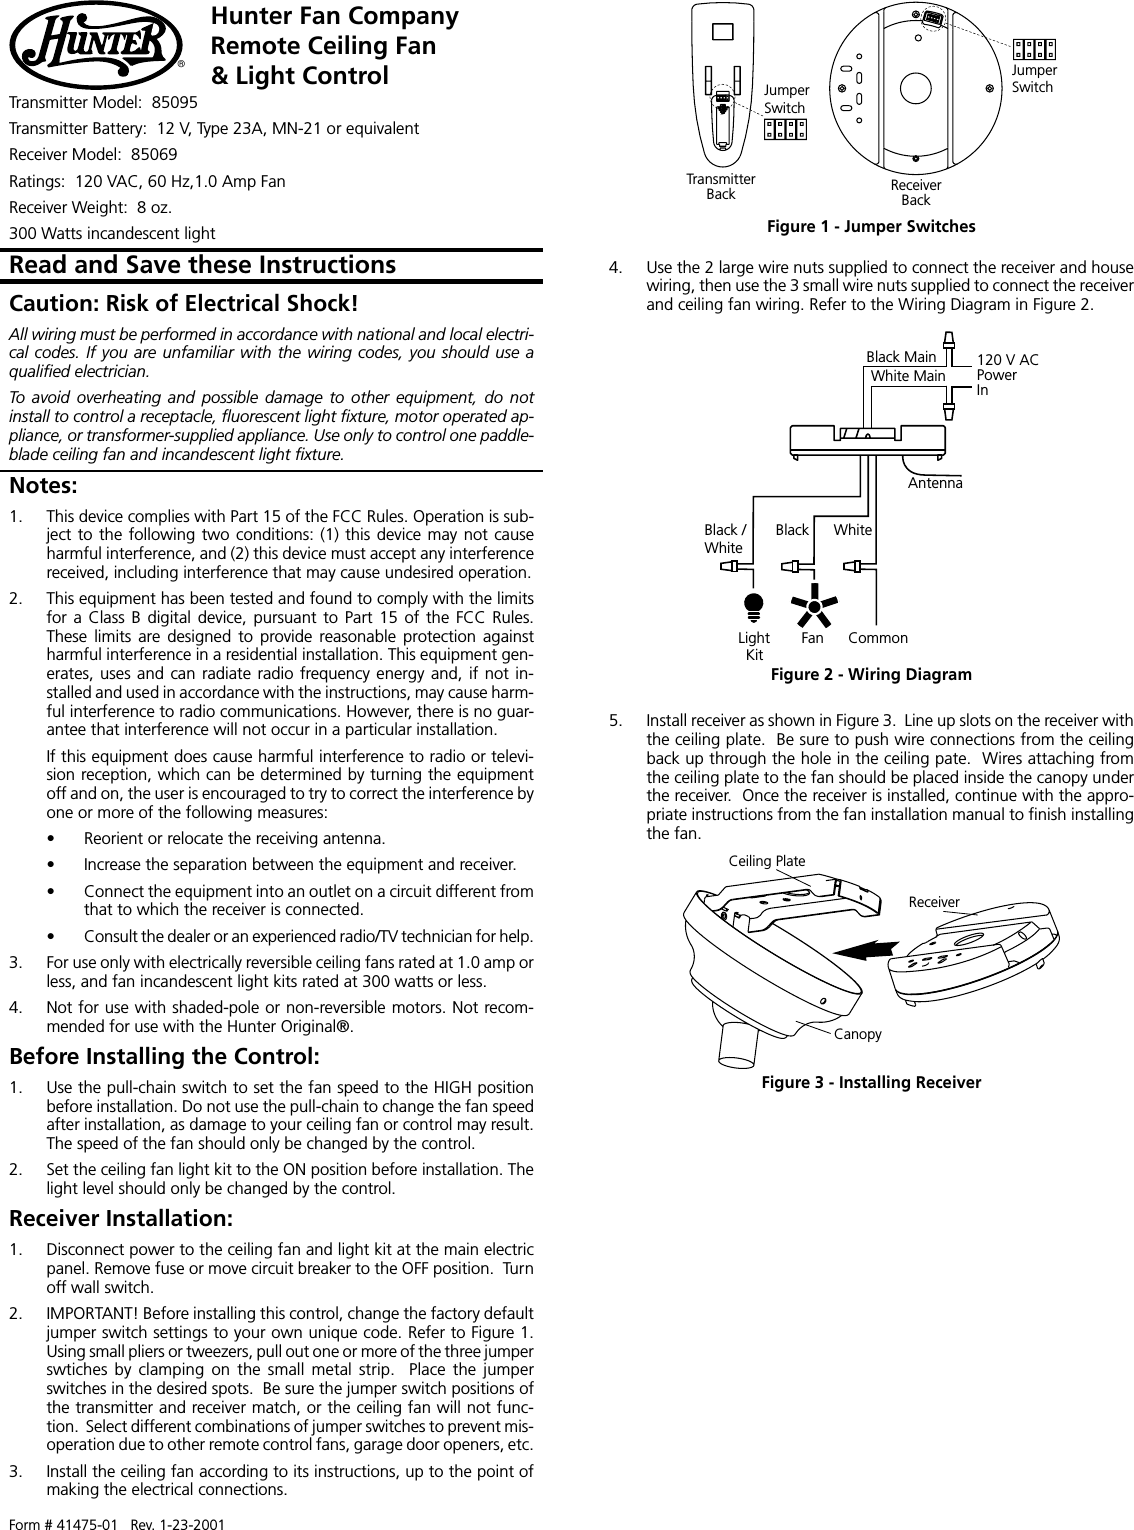 Form # 41475-01   Rev. 1-23-2001Hunter Fan CompanyRemote Ceiling Fan&amp; Light Control®Transmitter Model:  85095Transmitter Battery:  12 V, Type 23A, MN-21 or equivalentReceiver Model:  85069Ratings:  120 VAC, 60 Hz,1.0 Amp FanReceiver Weight:  8 oz.300 Watts incandescent lightNotes:1. This device complies with Part 15 of the FCC Rules. Operation is sub-ject to the following two conditions: (1) this device may not causeharmful interference, and (2) this device must accept any interferencereceived, including interference that may cause undesired operation.2. This equipment has been tested and found to comply with the limitsfor a Class B digital device, pursuant to Part 15 of the FCC Rules.These limits  are  designed  to provide reasonable protection againstharmful interference in a residential installation. This equipment gen-erates, uses and can radiate radio frequency energy and, if not in-stalled and used in accordance with the instructions, may cause harm-ful interference to radio communications. However, there is no guar-antee that interference will not occur in a particular installation.If this equipment does cause harmful interference to radio or televi-sion reception, which can be determined by turning the equipmentoff and on, the user is encouraged to try to correct the interference byone or more of the following measures:• Reorient or relocate the receiving antenna.• Increase the separation between the equipment and receiver.• Connect the equipment into an outlet on a circuit different fromthat to which the receiver is connected.• Consult the dealer or an experienced radio/TV technician for help.3. For use only with electrically reversible ceiling fans rated at 1.0 amp orless, and fan incandescent light kits rated at 300 watts or less.4. Not for use with shaded-pole or non-reversible motors. Not recom-mended for use with the Hunter Original®.Before Installing the Control:1. Use the pull-chain switch to set the fan speed to the HIGH positionbefore installation. Do not use the pull-chain to change the fan speedafter installation, as damage to your ceiling fan or control may result.The speed of the fan should only be changed by the control.2. Set the ceiling fan light kit to the ON position before installation. Thelight level should only be changed by the control.Receiver Installation:1. Disconnect power to the ceiling fan and light kit at the main electricpanel. Remove fuse or move circuit breaker to the OFF position.  Turnoff wall switch.2. IMPORTANT! Before installing this control, change the factory defaultjumper switch settings to your own unique code. Refer to Figure 1.Using small pliers or tweezers, pull out one or more of the three jumperswtiches by  clamping  on  the  small  metal  strip.  Place  the  jumperswitches in the desired spots.  Be sure the jumper switch positions ofthe transmitter and receiver match, or the ceiling fan will not func-tion.  Select different combinations of jumper switches to prevent mis-operation due to other remote control fans, garage door openers, etc.3. Install the ceiling fan according to its instructions, up to the point ofmaking the electrical connections.4. Use the 2 large wire nuts supplied to connect the receiver and housewiring, then use the 3 small wire nuts supplied to connect the receiverand ceiling fan wiring. Refer to the Wiring Diagram in Figure 2.Caution: Risk of Electrical Shock!All wiring must be performed in accordance with national and local electri-cal codes.  If you are unfamiliar with the wiring  codes, you should use aqualified electrician.To  avoid  overheating  and  possible  damage  to  other  equipment,  do  notinstall to control a receptacle, fluorescent light fixture, motor operated ap-pliance, or transformer-supplied appliance. Use only to control one paddle-blade ceiling fan and incandescent light fixture.Read and Save these InstructionsCeiling PlateReceiverCanopyFigure 3 - Installing ReceiverJumperSwitchTransmitterJumperSwitchBack ReceiverBackFigure 1 - Jumper SwitchesFigure 2 - Wiring DiagramLightKitBlack /WhiteBlack WhiteFan CommonAntenna120 V ACPowerInWhite MainBlack Main5. Install receiver as shown in Figure 3.  Line up slots on the receiver withthe ceiling plate.  Be sure to push wire connections from the ceilingback up through the hole in the ceiling pate.  Wires attaching fromthe ceiling plate to the fan should be placed inside the canopy underthe receiver.  Once the receiver is installed, continue with the appro-priate instructions from the fan installation manual to finish installingthe fan.